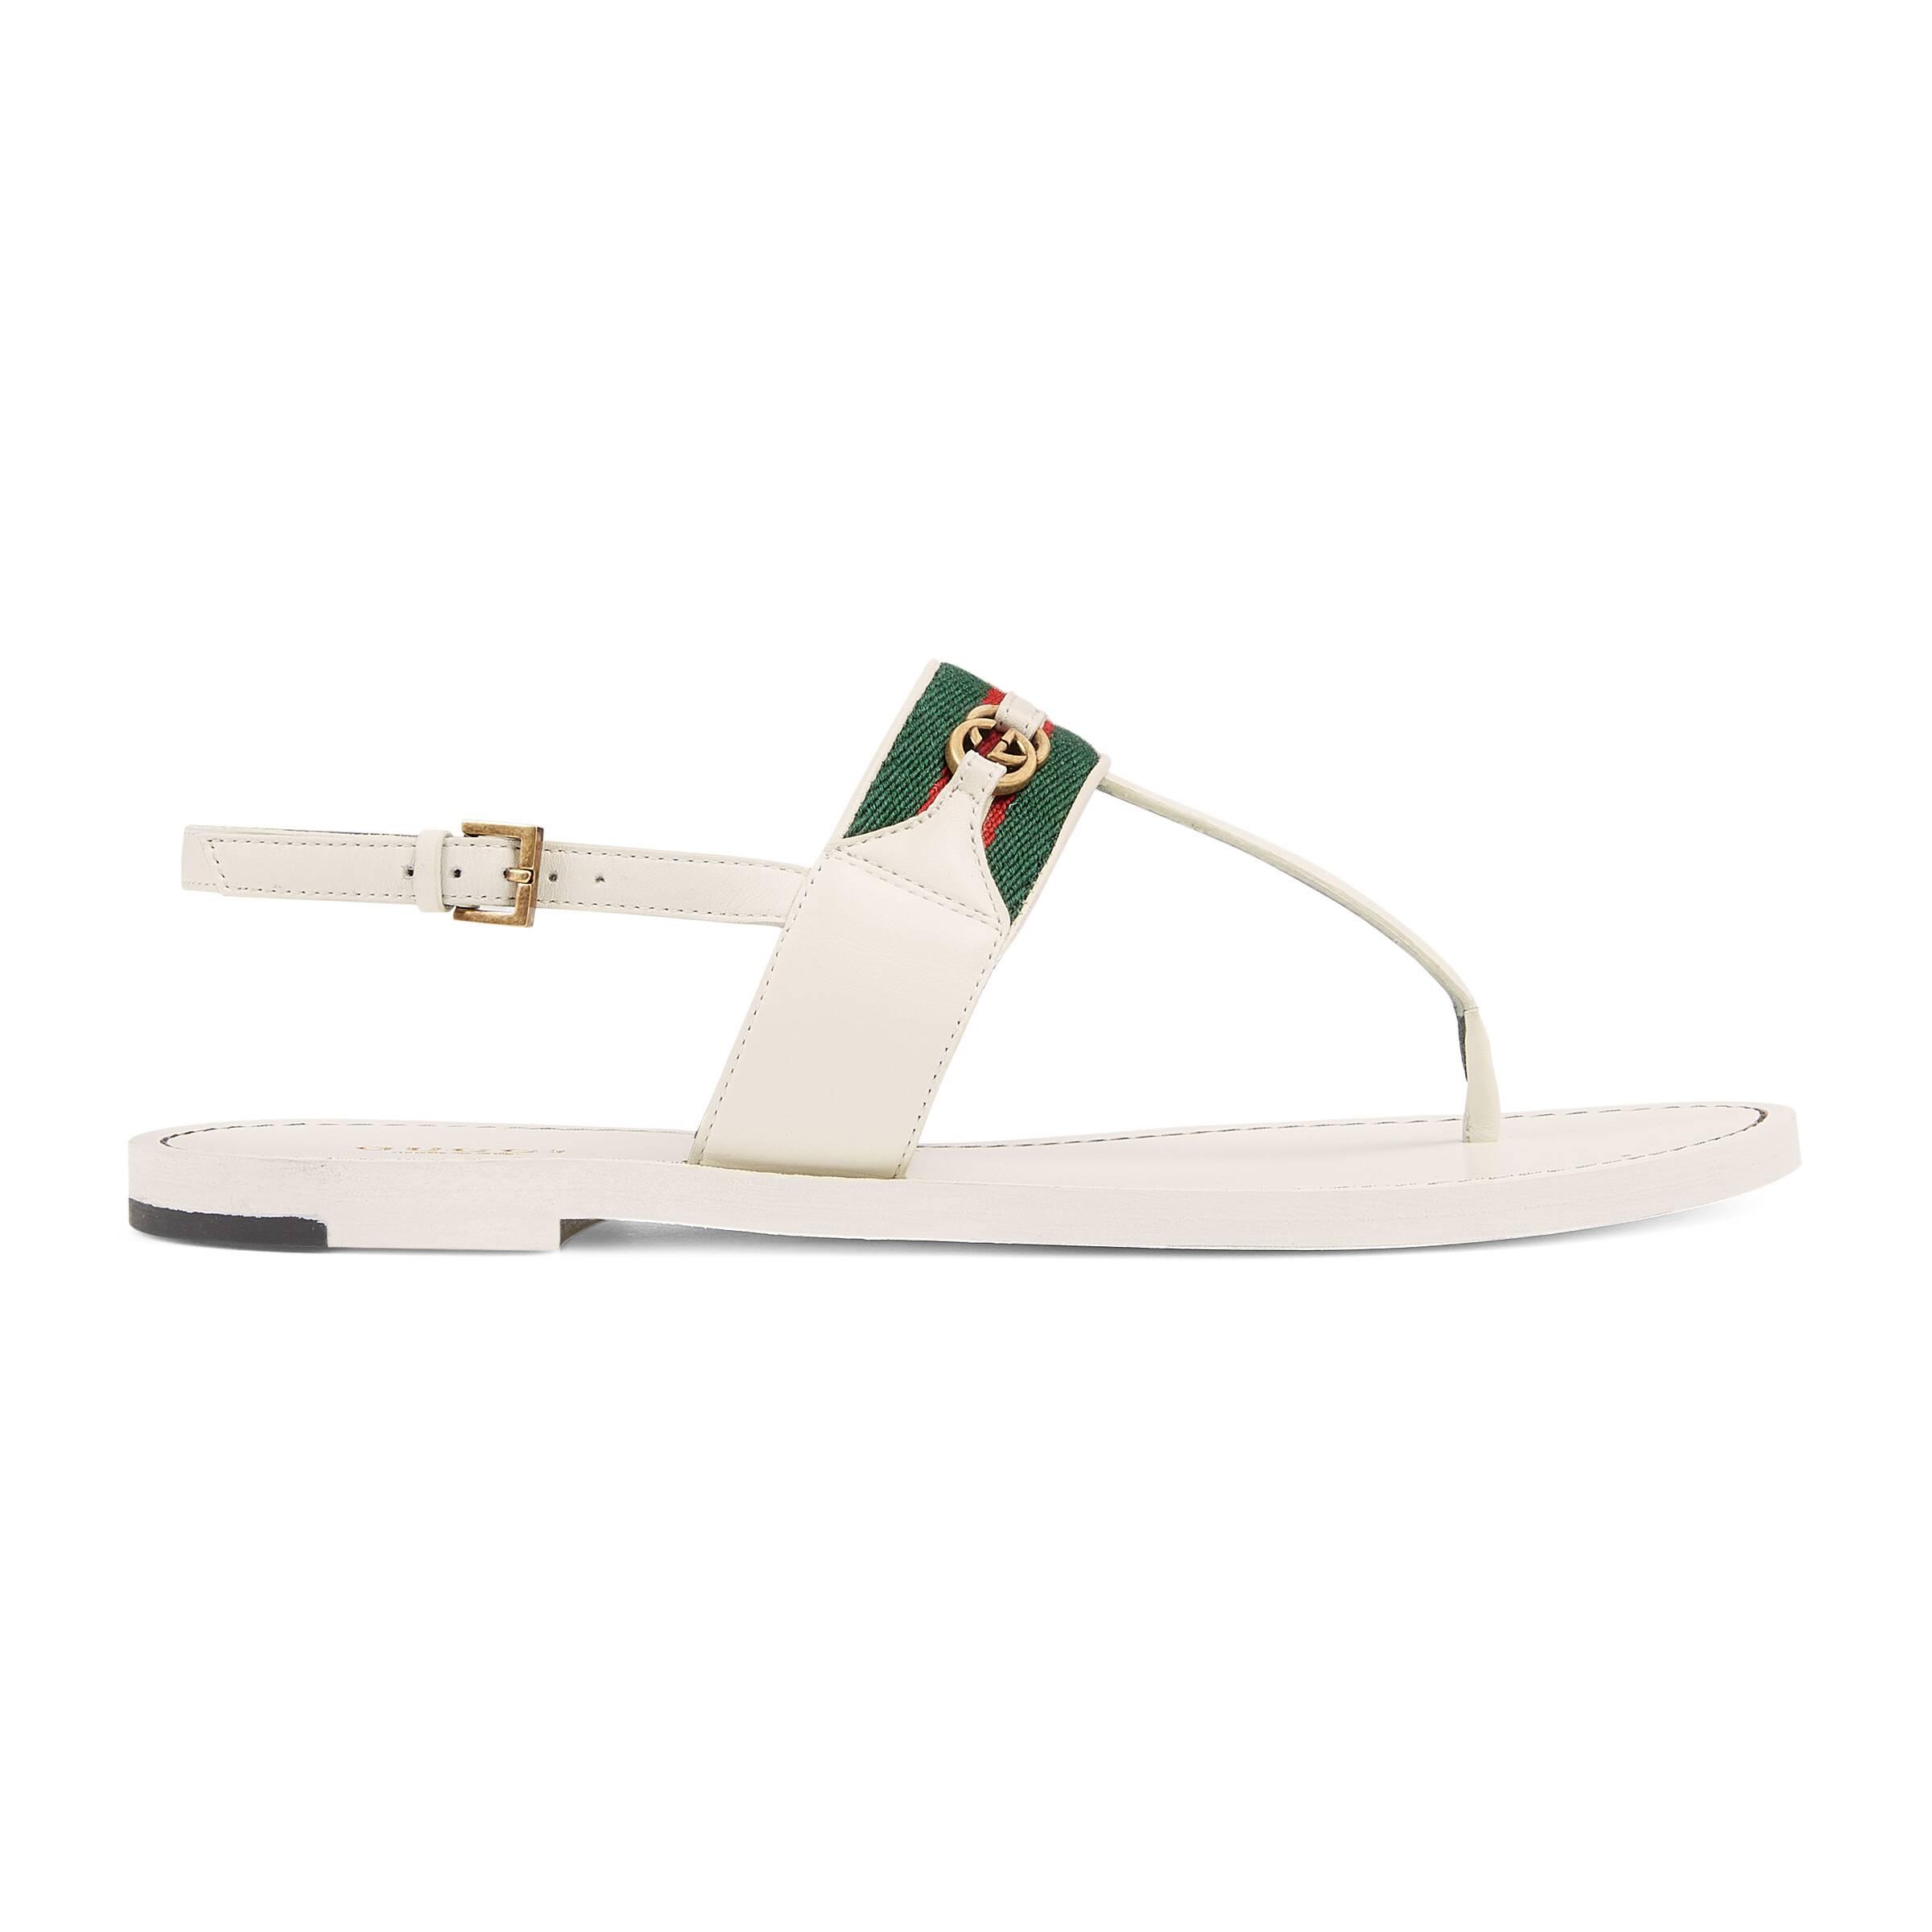 Buy > gucci web & leather thong sandals > in stock